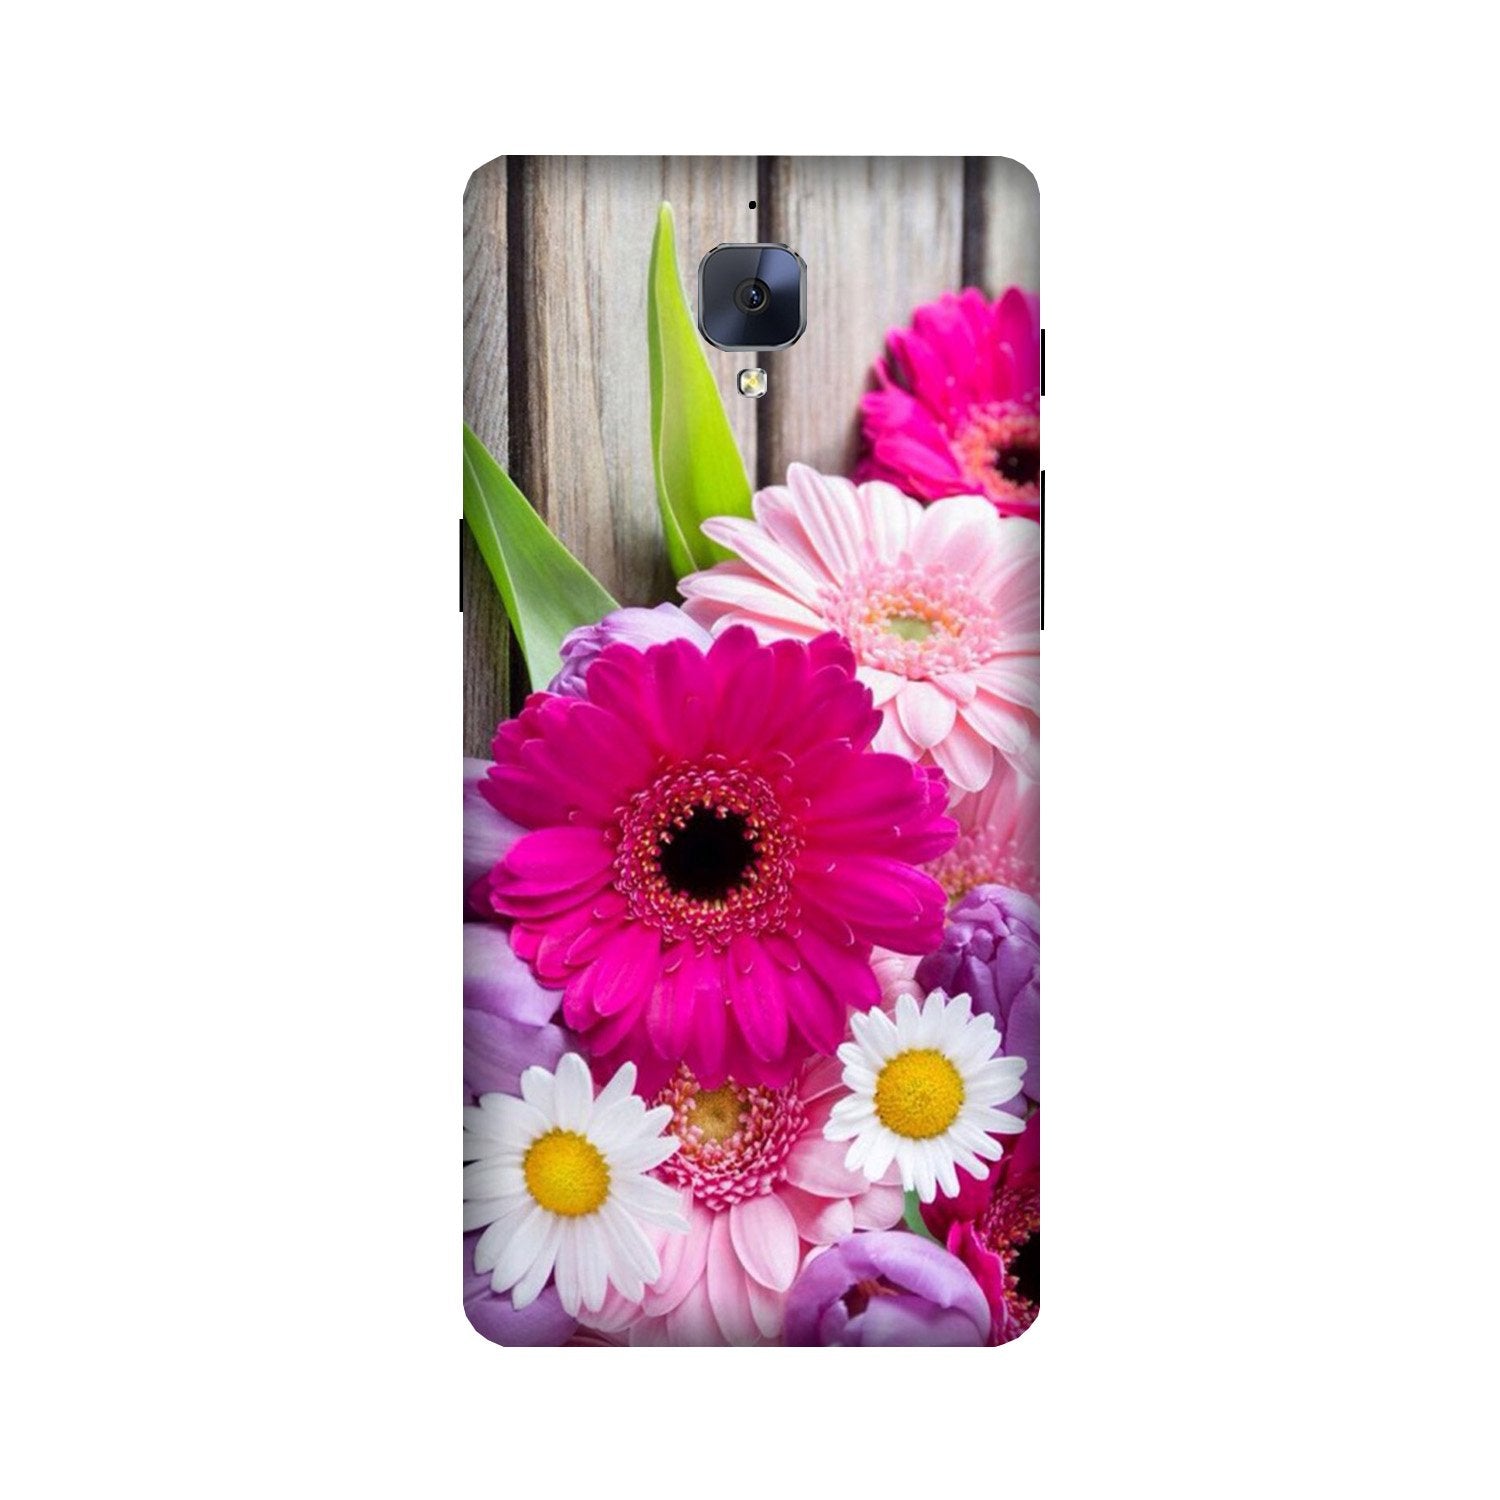 Coloful Daisy2 Case for OnePlus 3/ 3T